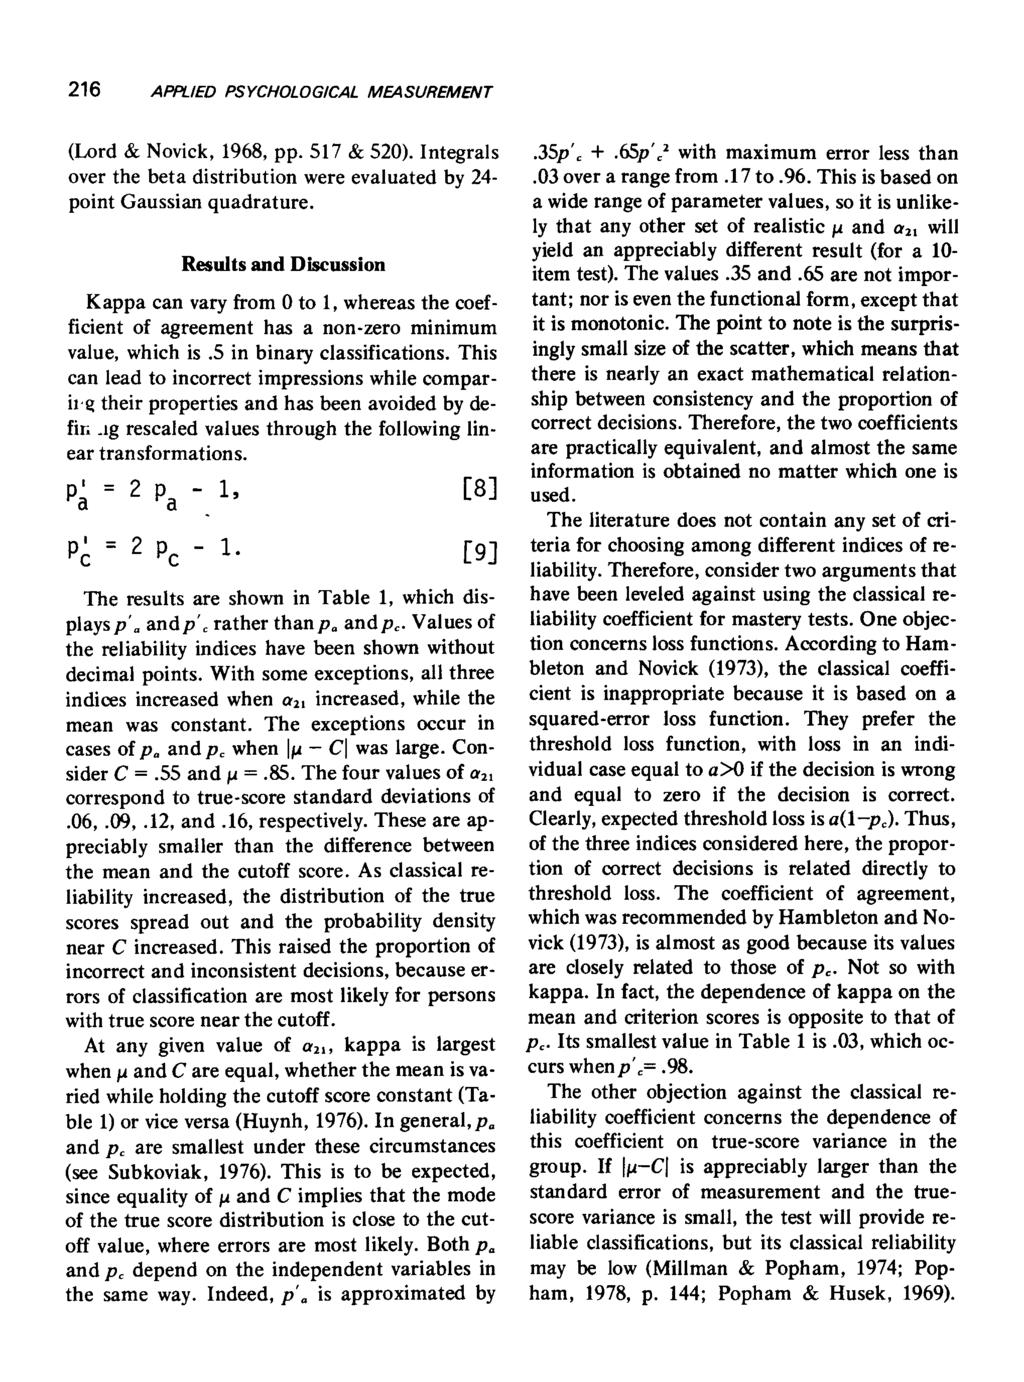 216 (Lord & Novick, 1968, pp. 517 & 52). Integrals over the beta distribution were evaluated by 24- point Gaussian quadrature.